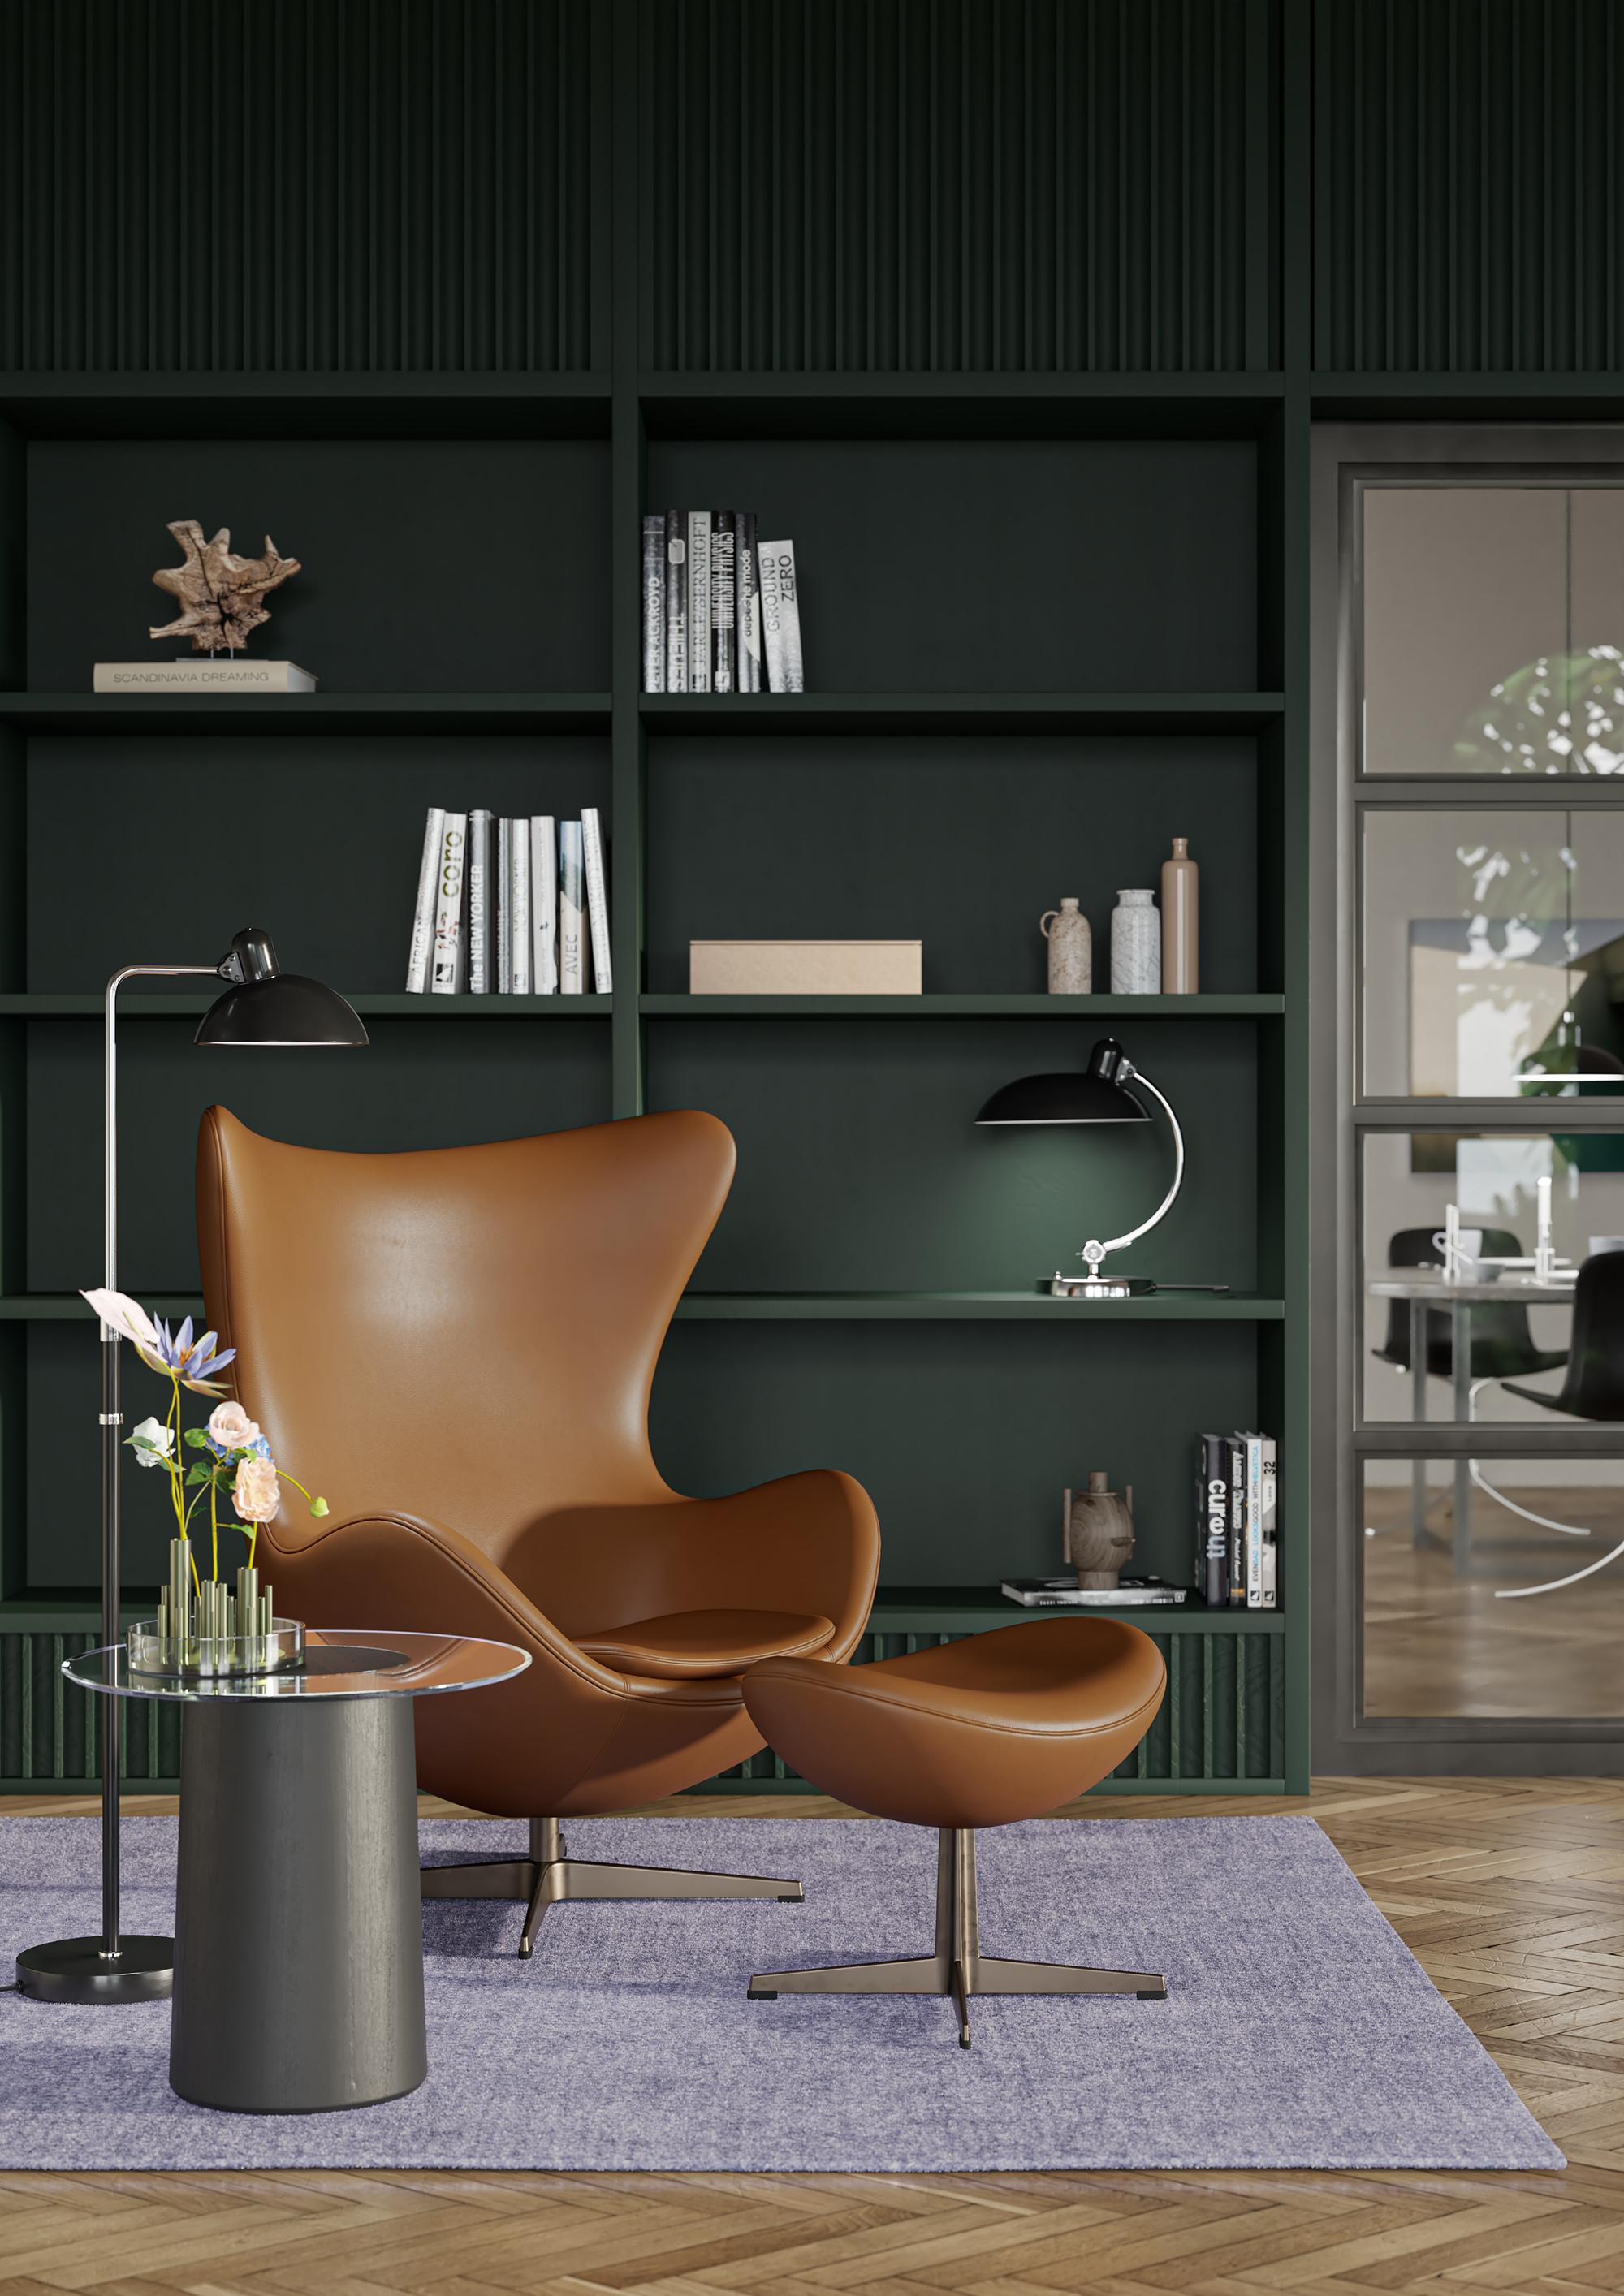 Arne Jacobsen 'Egg' Chair for Fritz Hansen in Leather Upholstery (Cat. 3).

Established in 1872, Fritz Hansen has become synonymous with legendary Danish design. Combining timeless craftsmanship with an emphasis on sustainability, the brand’s